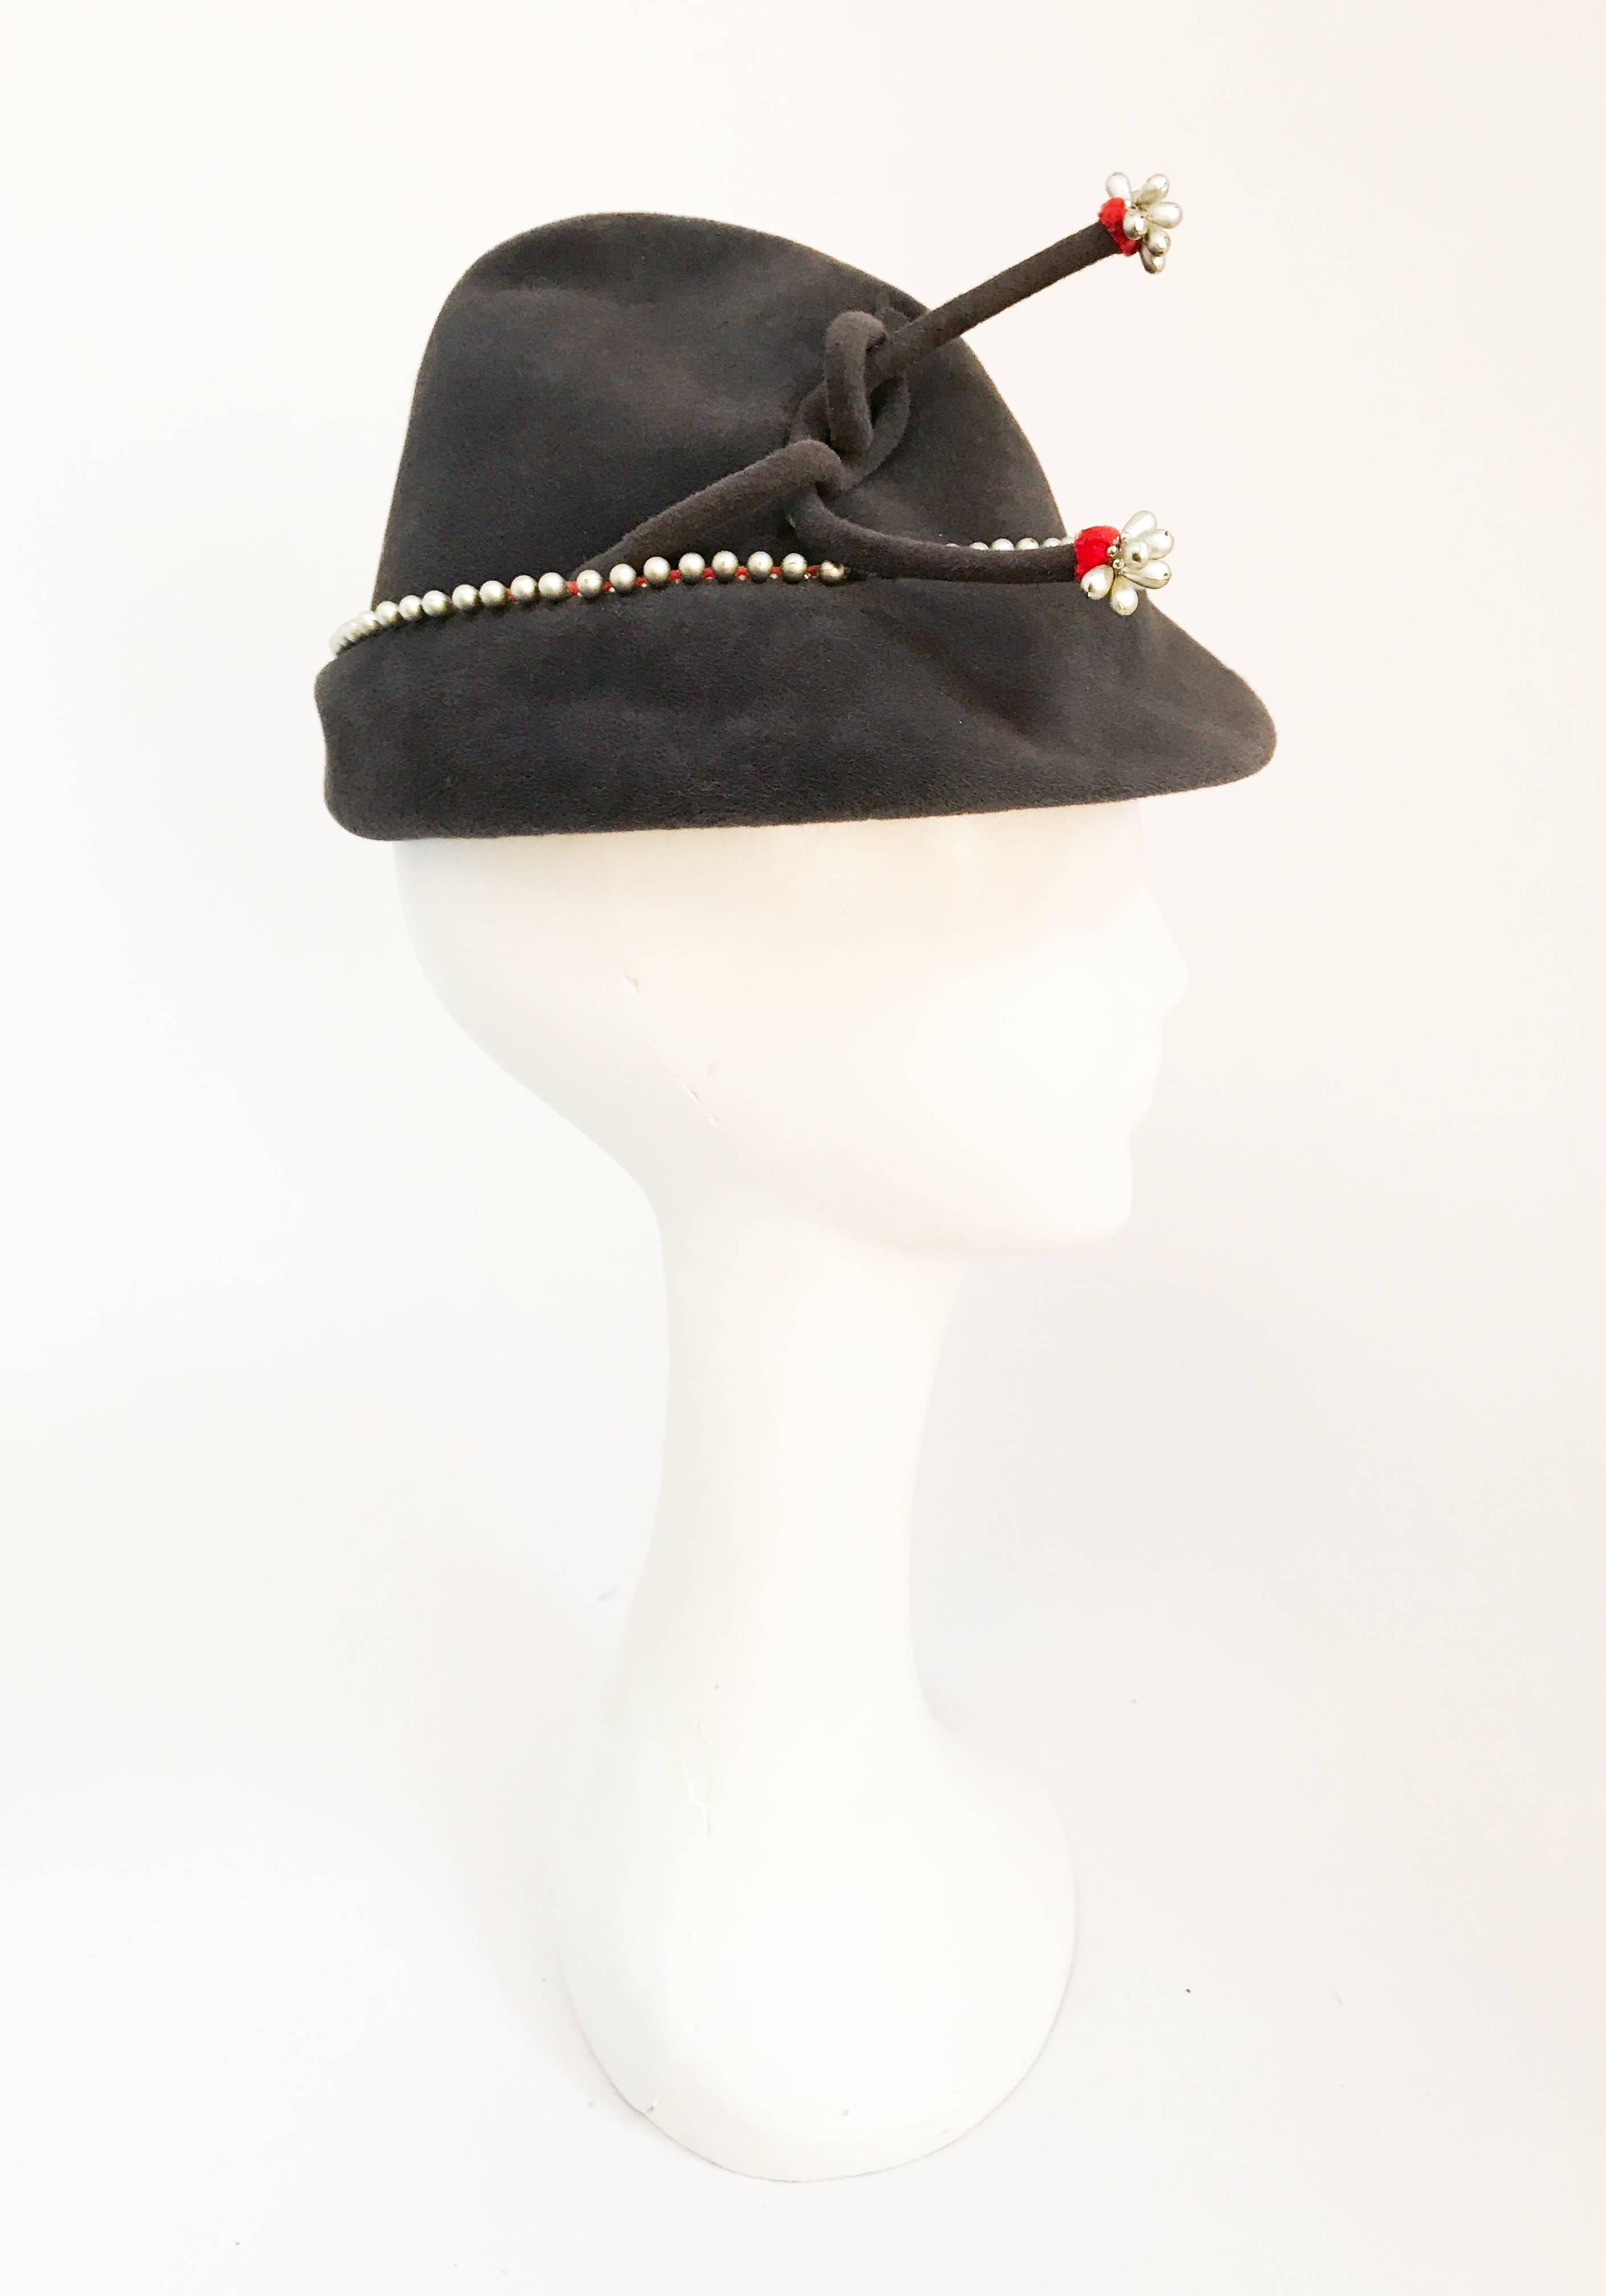 1930s Grey Wool Fur Felt Hat with Pearl and Velvet Accents. Handmade grey fur felt hat with pearl accents and coral-tone velvet accents. Heavily inspired design by 1930's movie Robin Hood.   22 inch circumference (Medium).